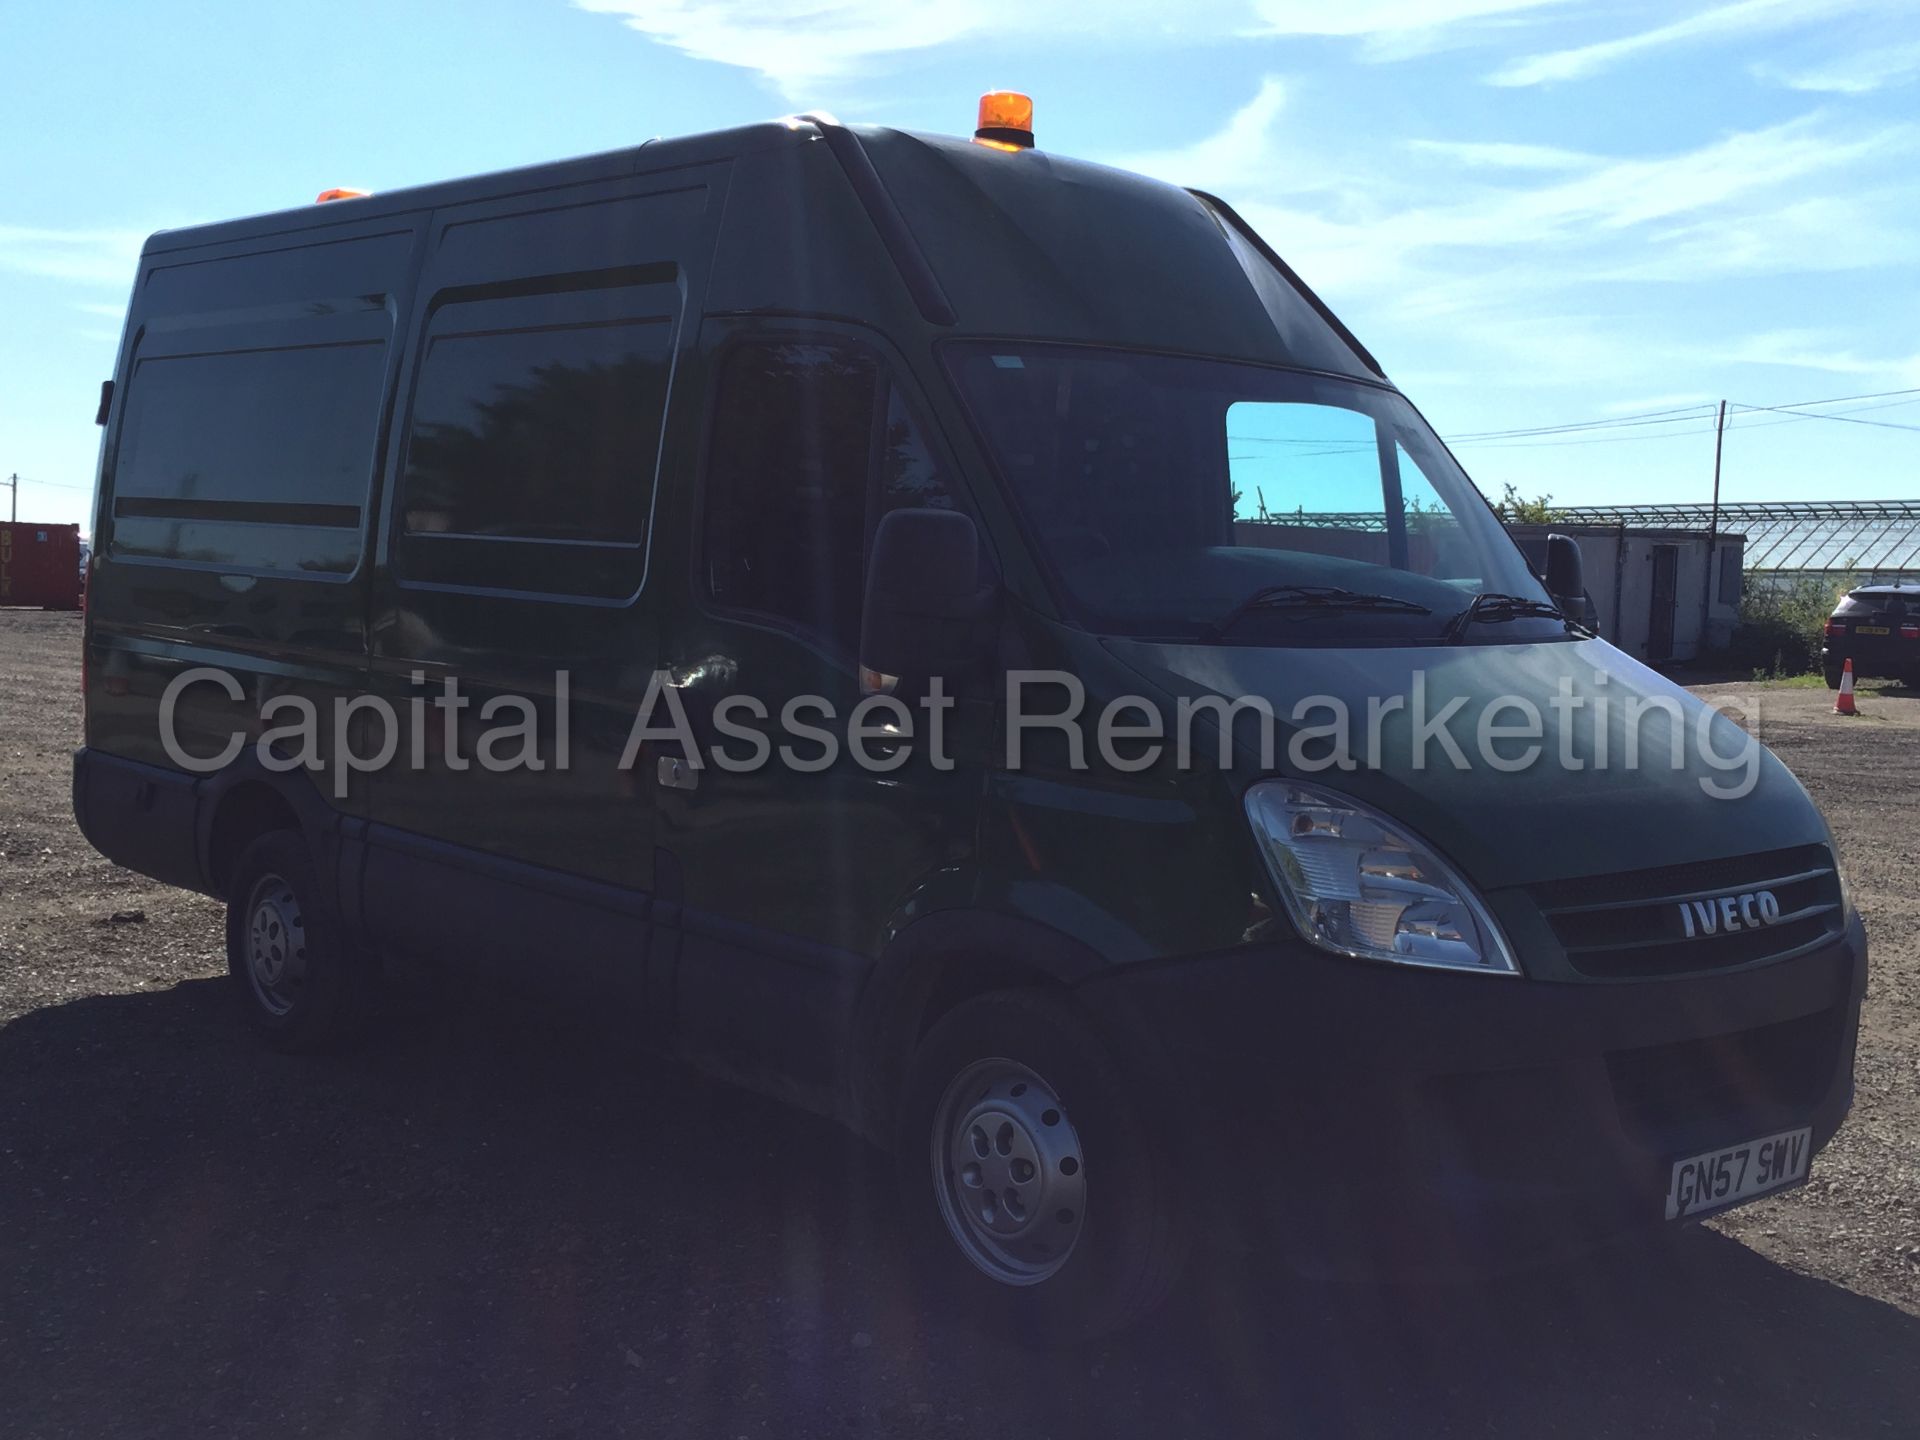 IVECO DAILY 35S12 'MWB HI-ROOF' (2008 MODEL) '2.3 DIESEL' (1 COMPANY OWNER FROM NEW) - Image 2 of 17